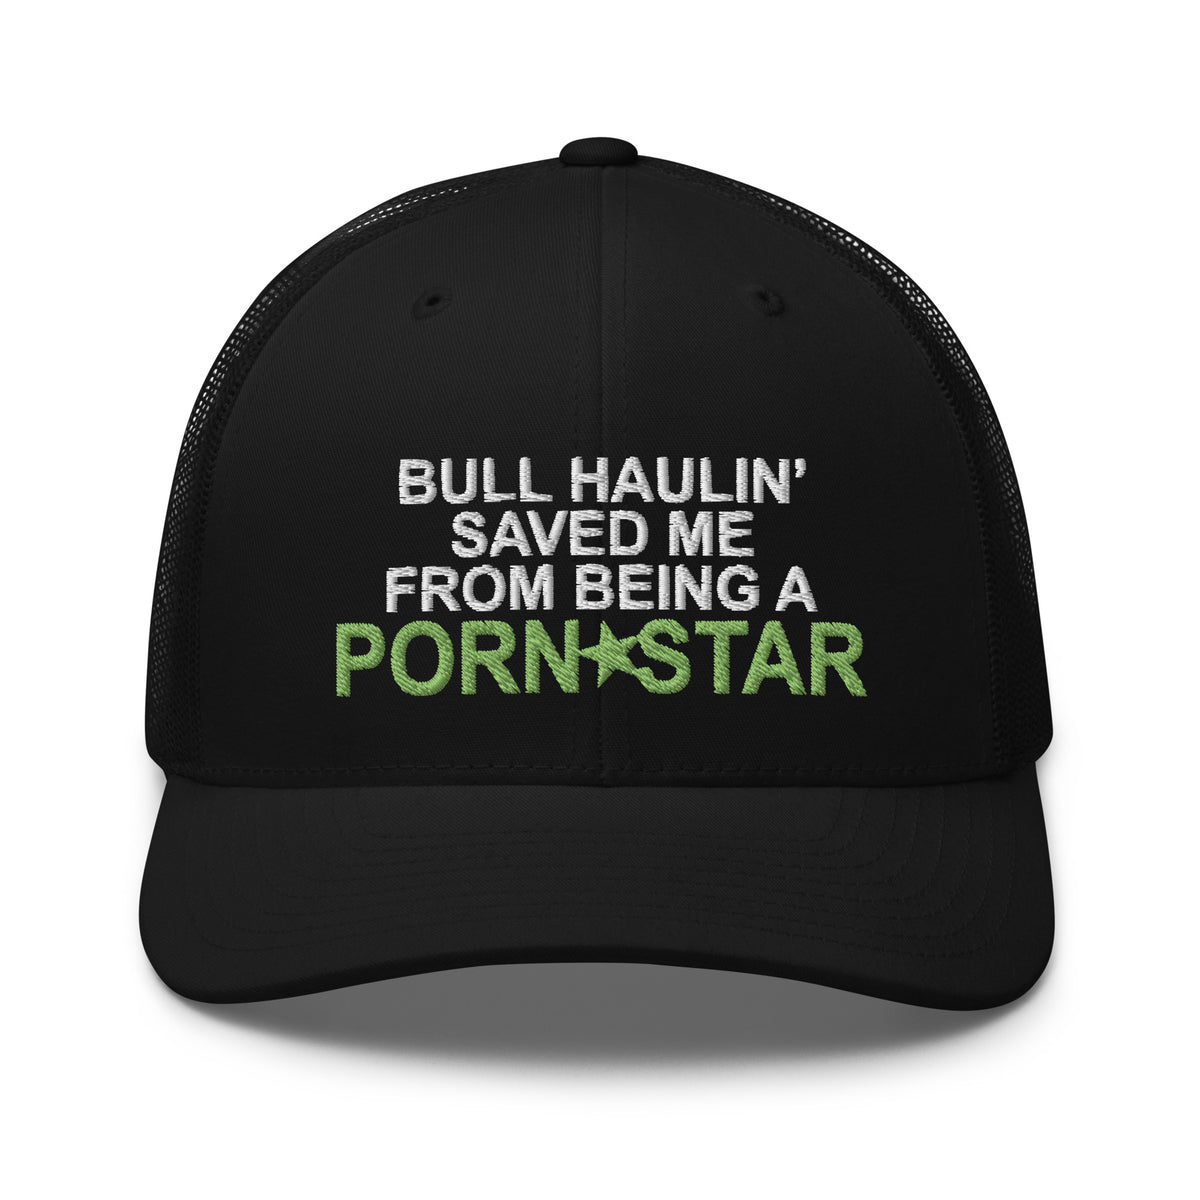 Bull Haulin' Saved Me From Being a Porn Star - Snapback - Trucker Cap - Free Shipping